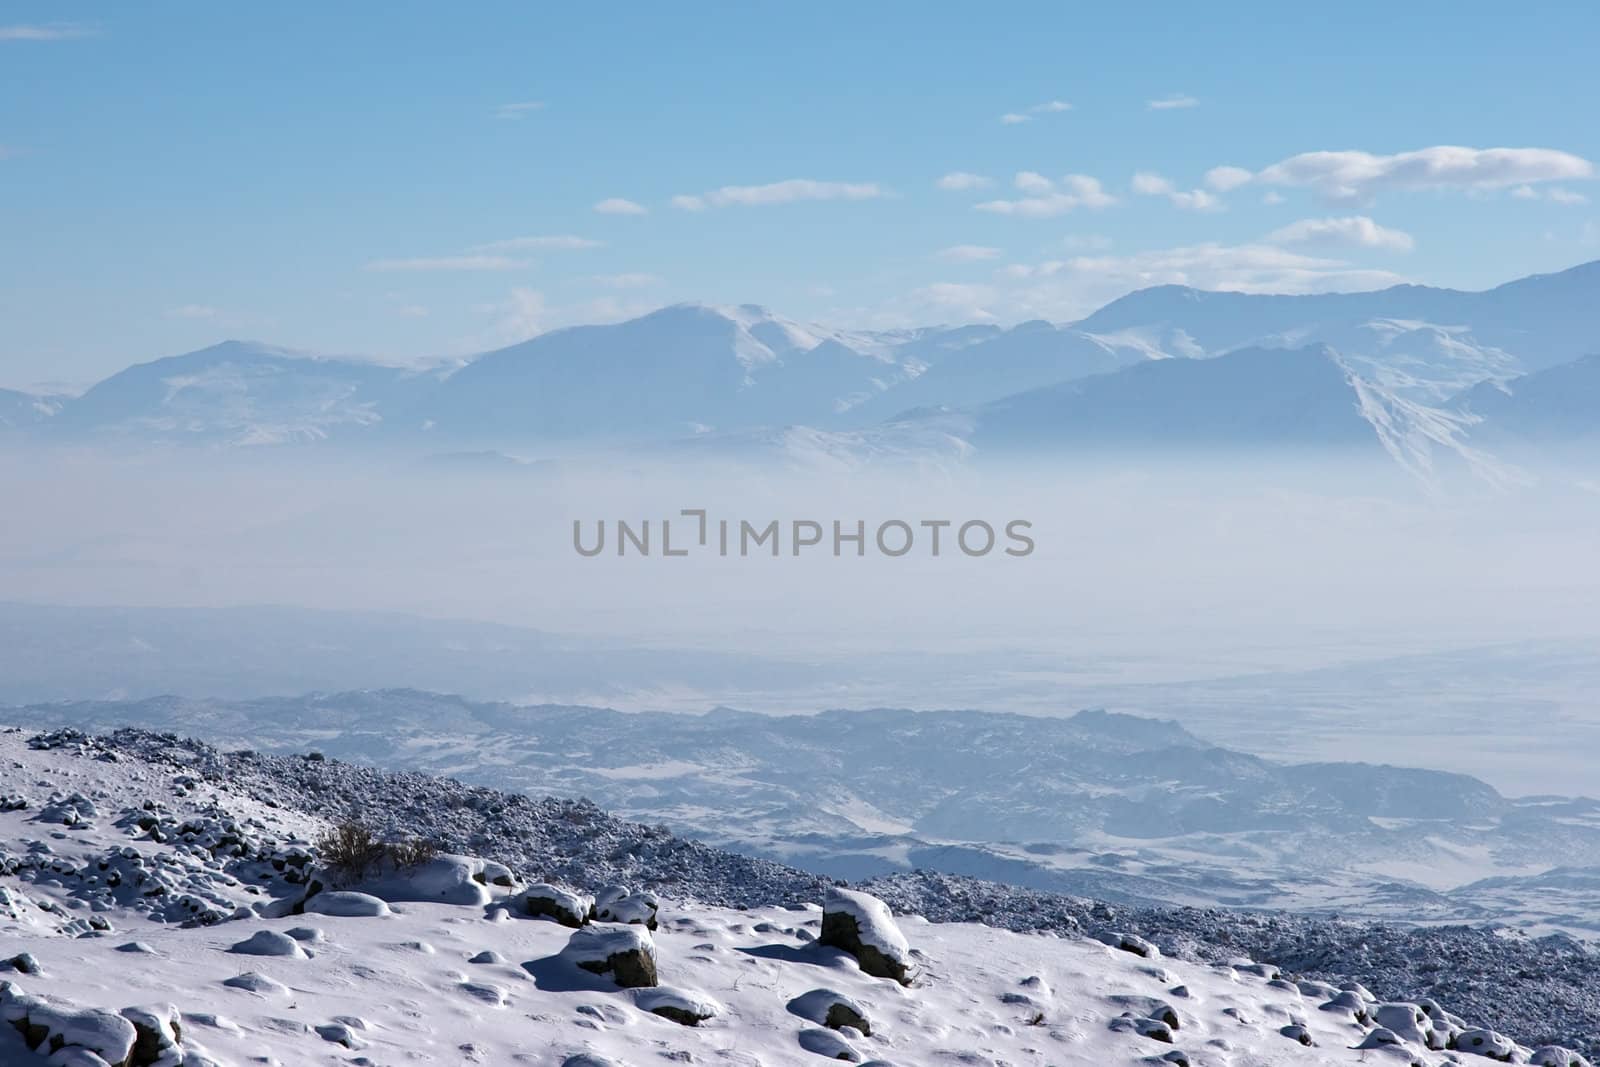 Photo from Ararat slopes in the direction of Iran. Mount Ararat (Agri Dagi) is an inactive volcano located near Iranian and Armenian borders and the tallest peak in Turkey.